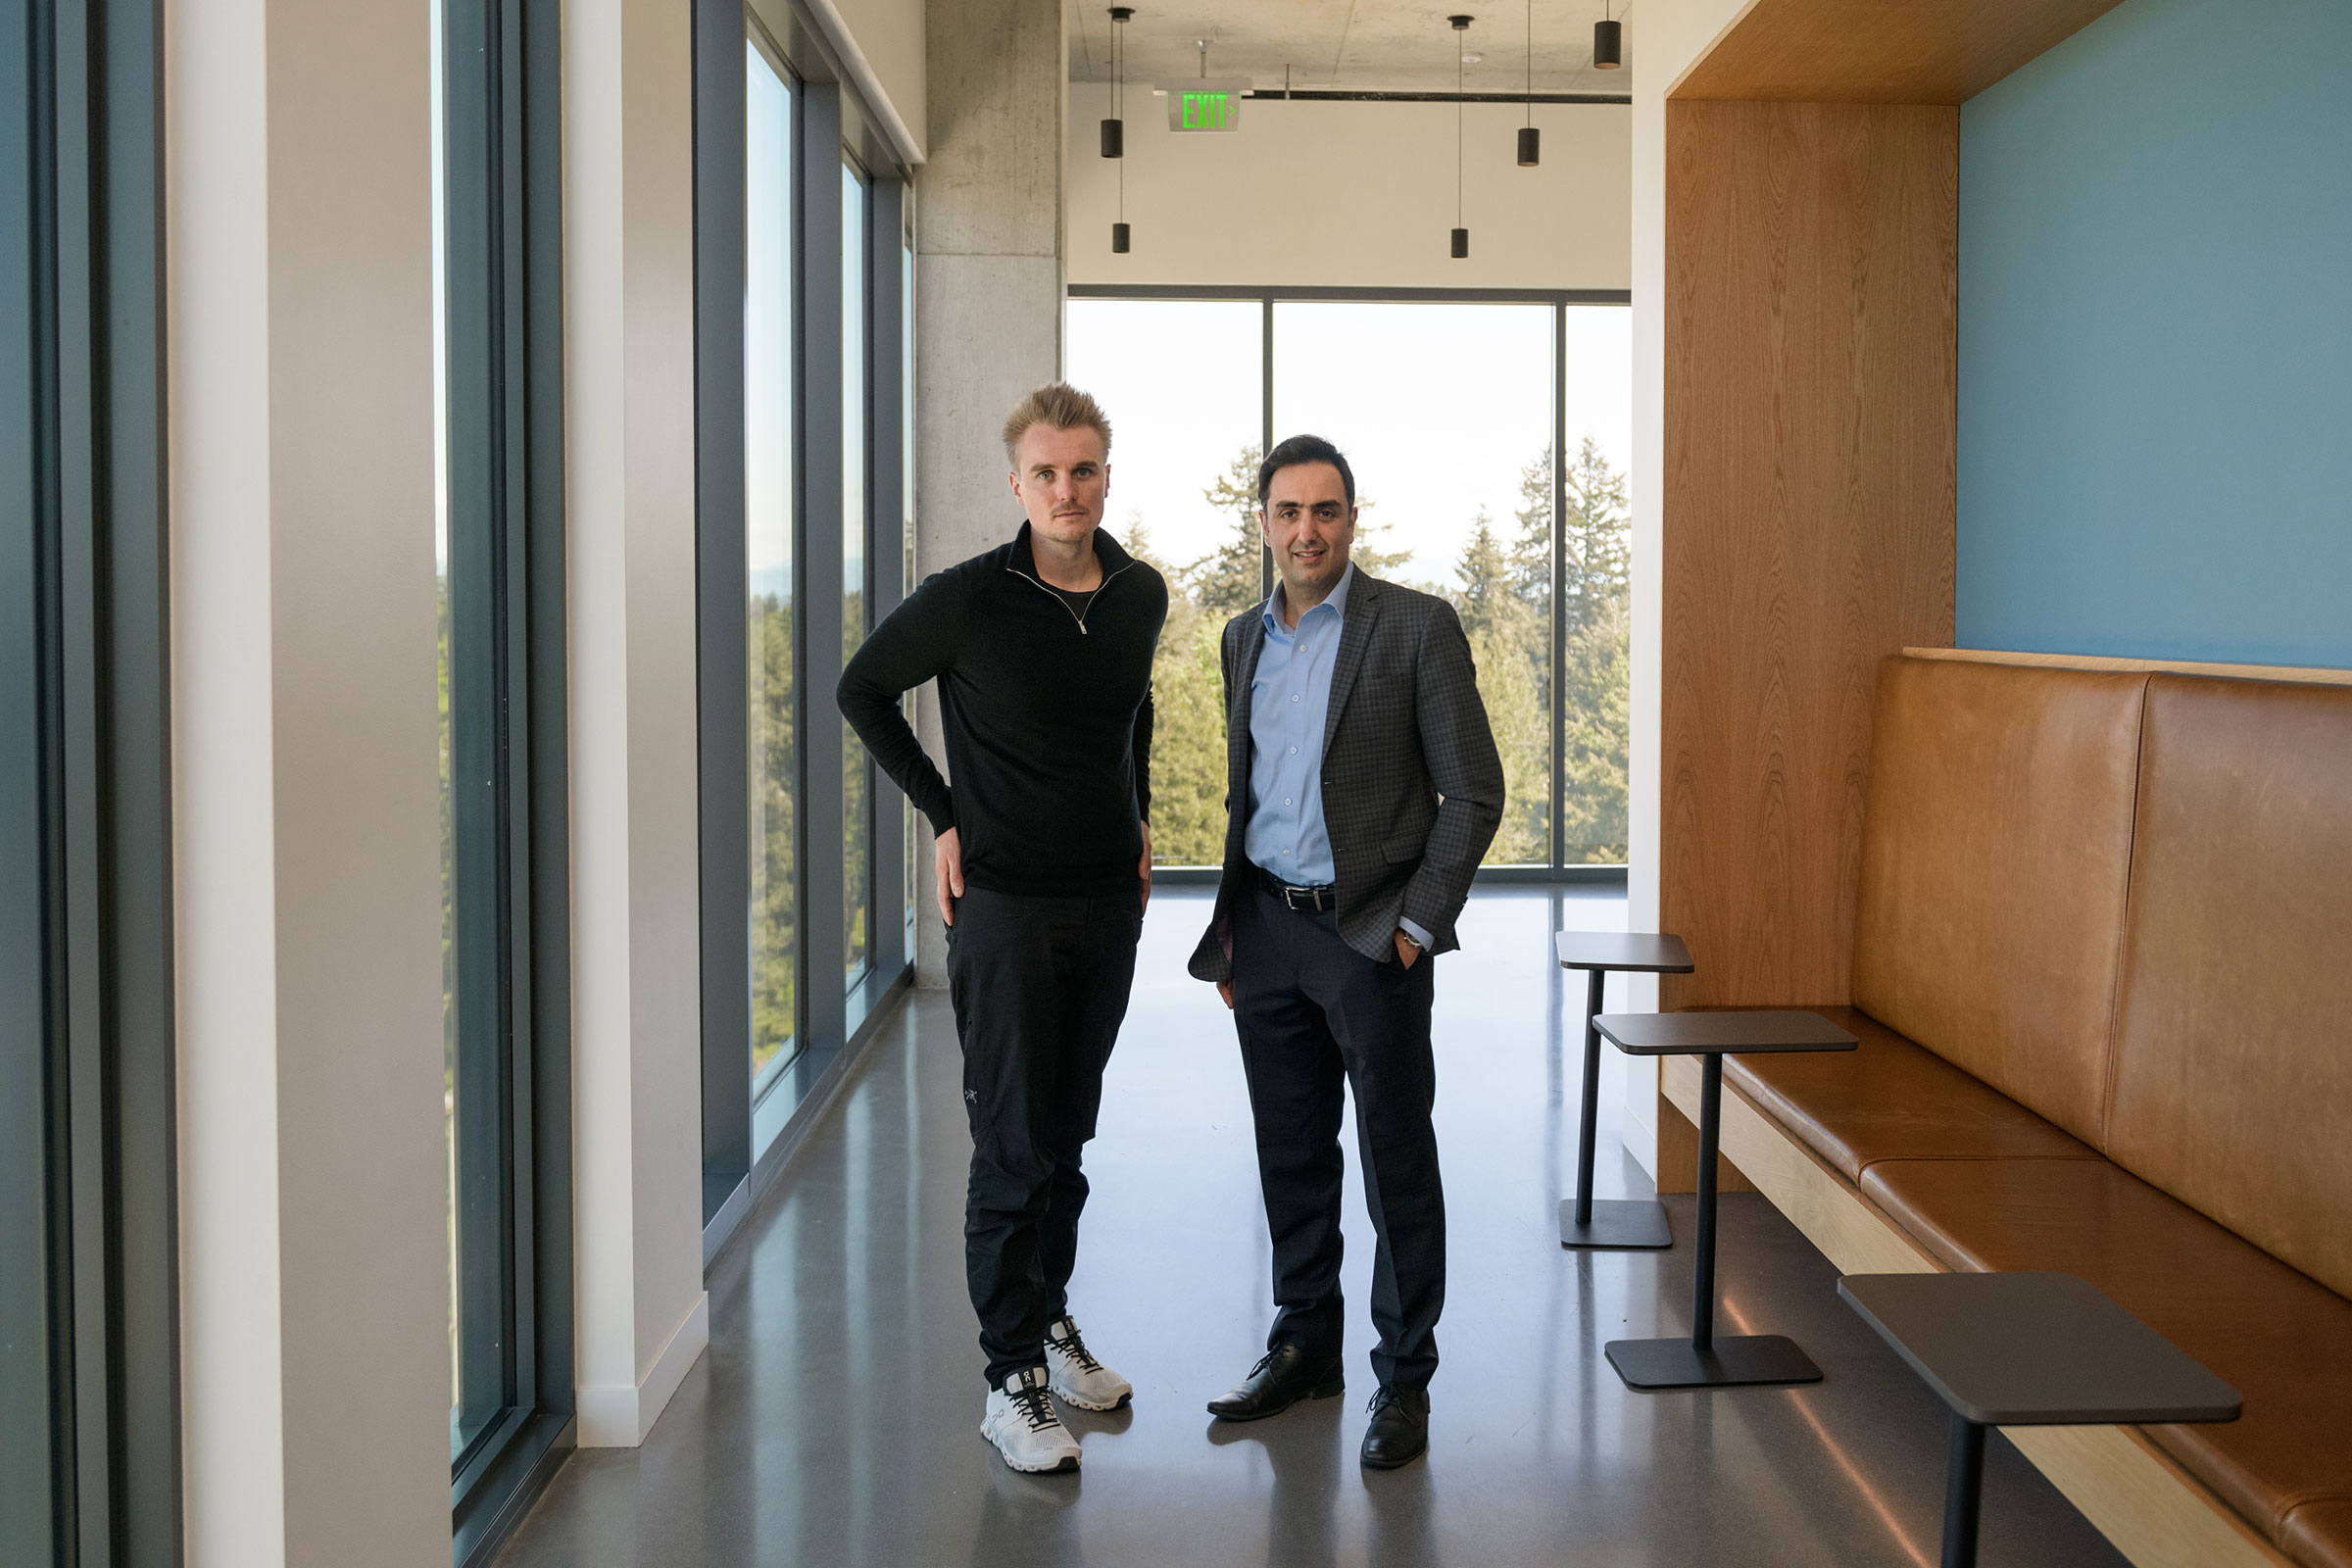 Phillip Buckendorf, Airspace Intelligence CEO and co-founder and Pasha Seleh, Alaska Airlines flight operations strategy and innovation director, pose for a portrait inside Alaska Airlines Hub in SeaTac, WA on May 14, 2021.